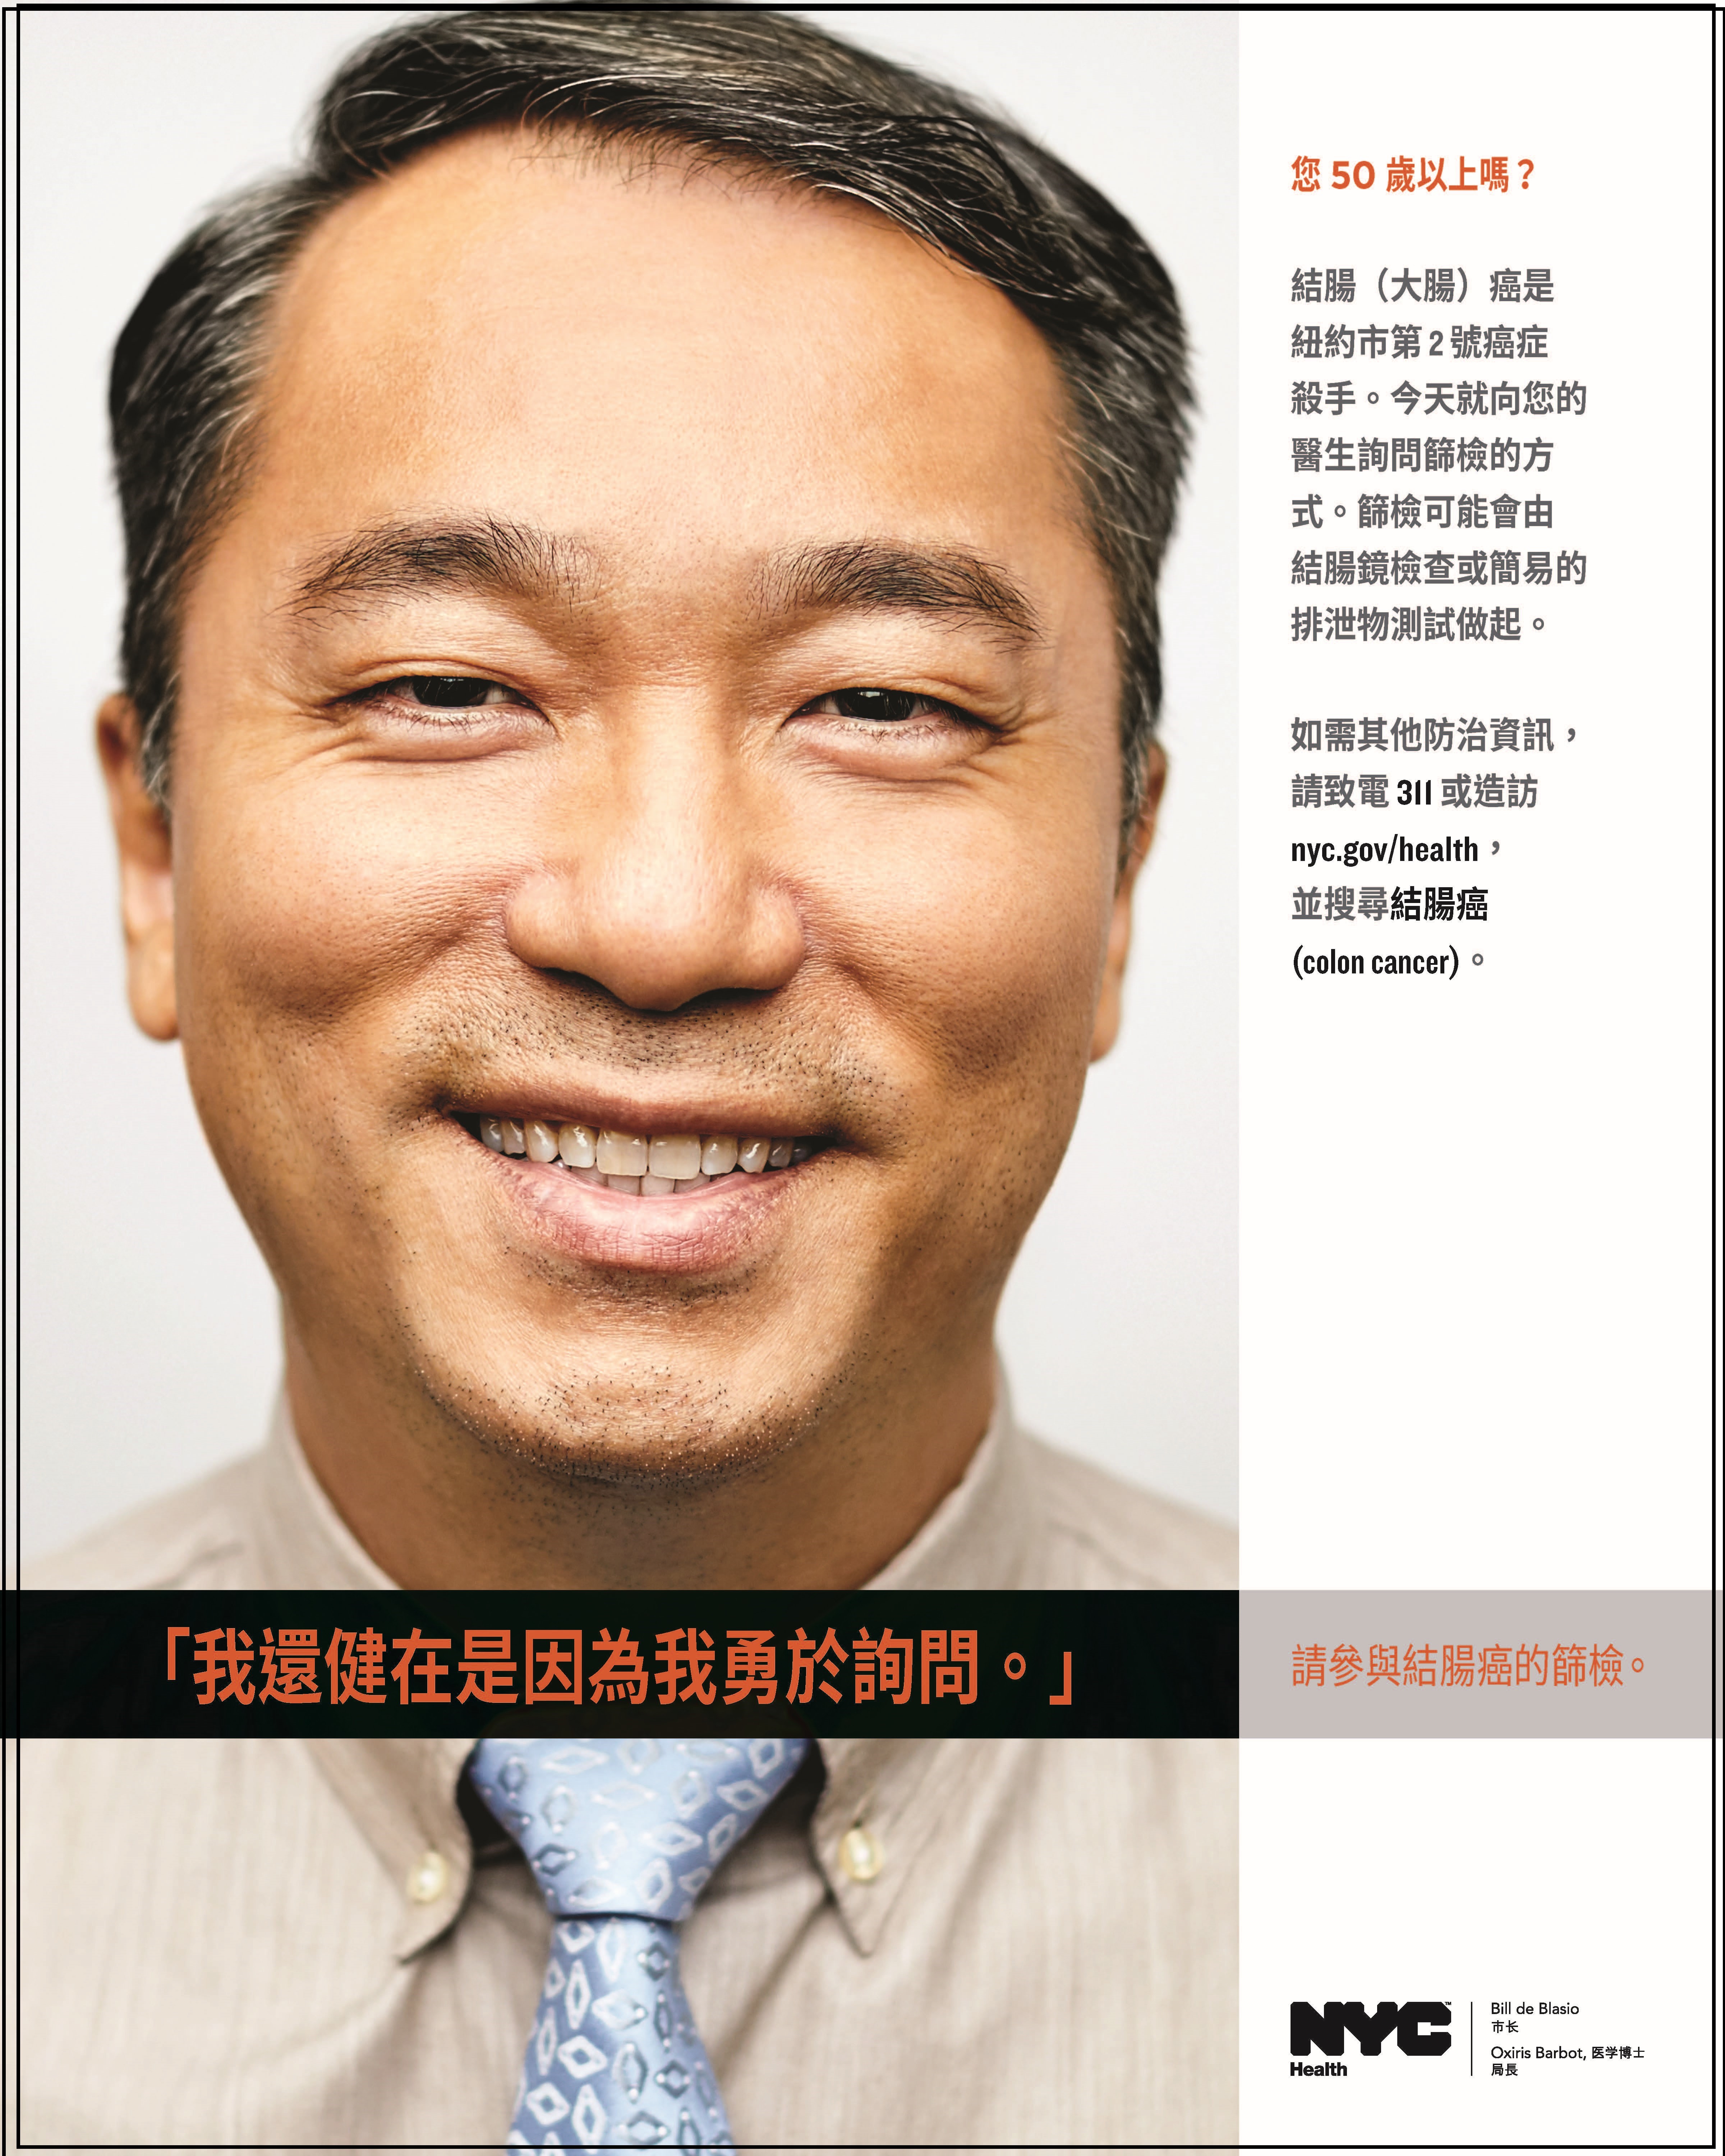 Asian man is smiling at the camera. Text reads 'I'm alive because I wasn't afraid to ask.'